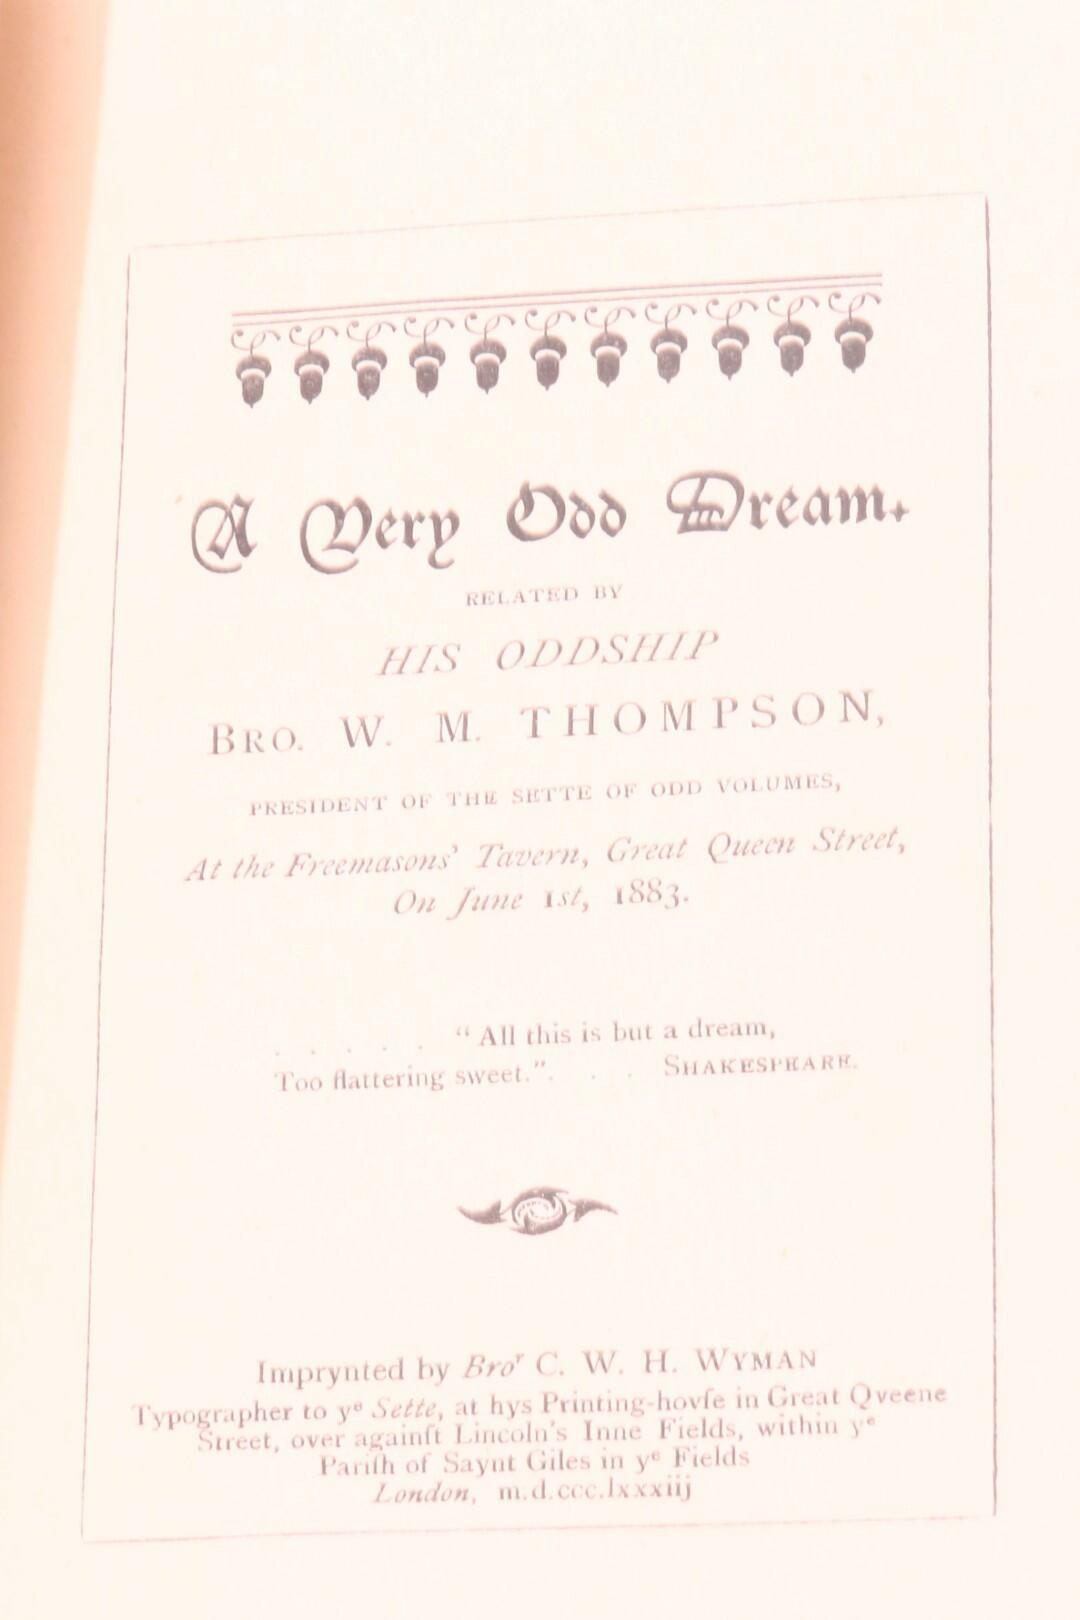 W.M. Thompson - A Very Odd Dream Related to His Oddship Bro W M Thompson President of the Sette of Old Volumes at the Freemason's Tavern, Great Queen Street, on June 1st, 1882 - C.W.H. Wyman, 1883, First Edition.